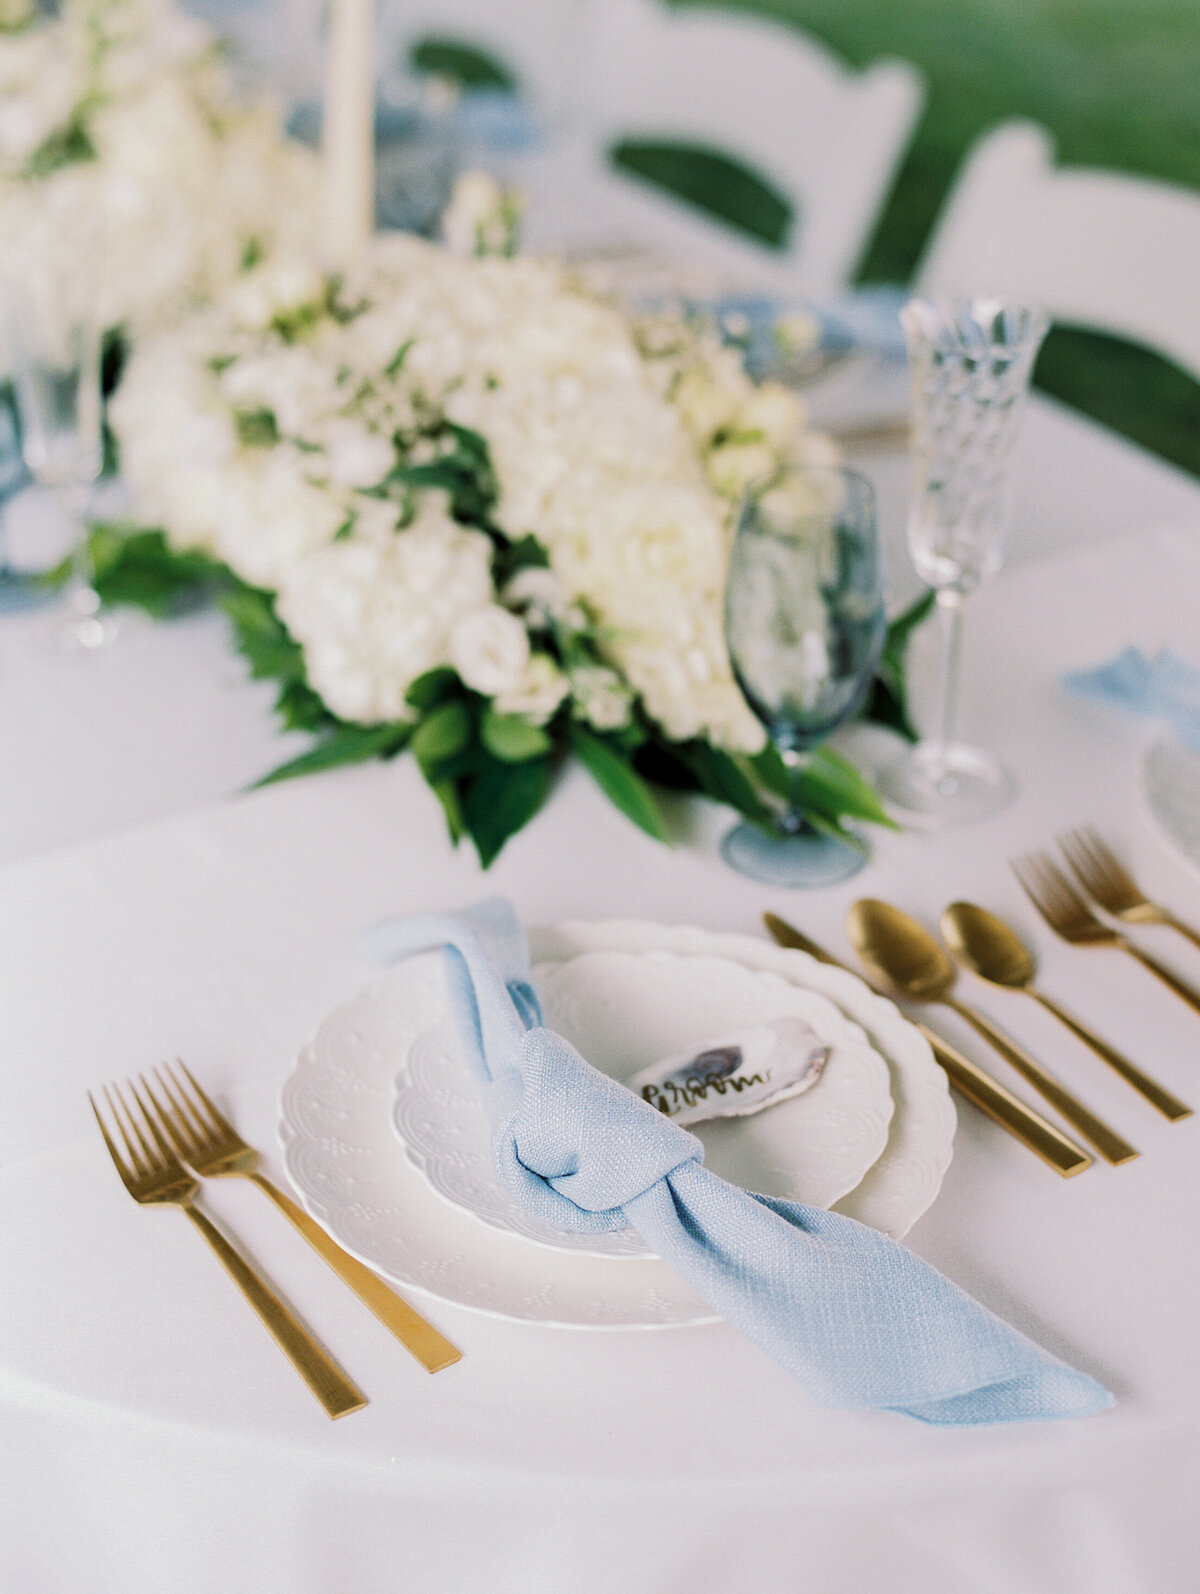 place-setting-with-blue-napkin